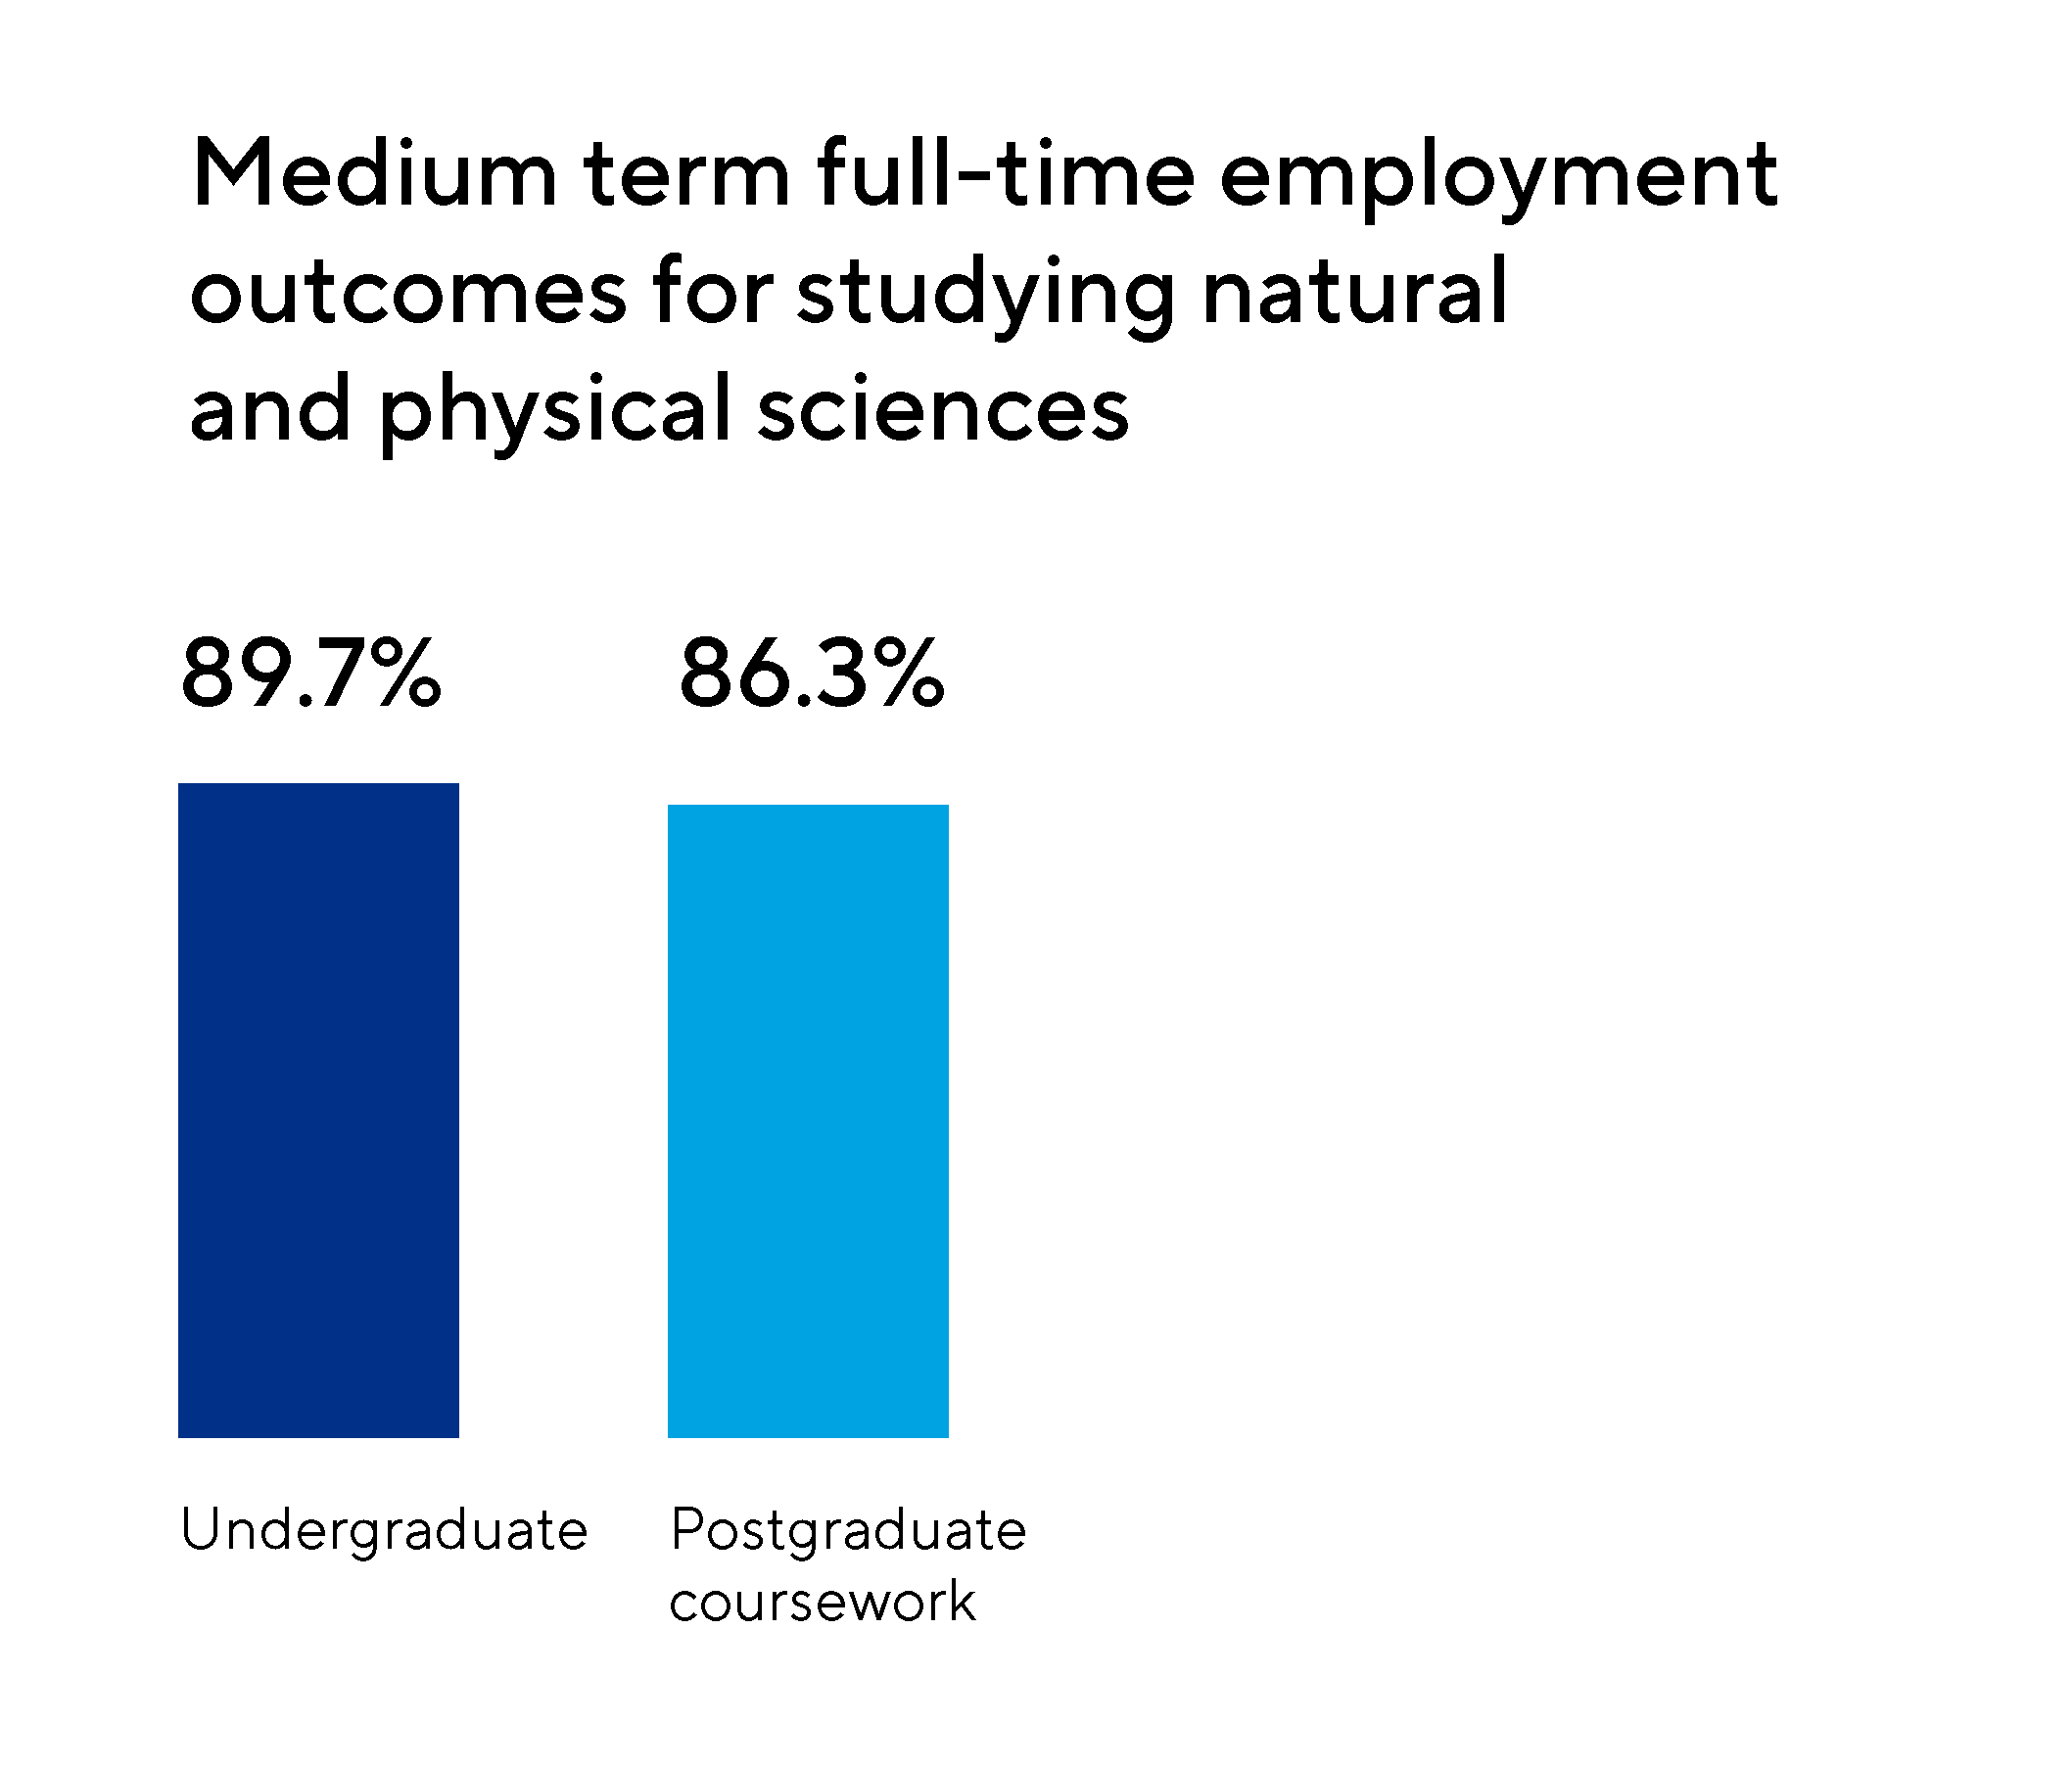 Image of a graph displaying the medium-term full-term employment outcomes for studying natural and physical sciences with 89.7% allocated to undergraduate and 86.3% allocated to postgraduate coursework